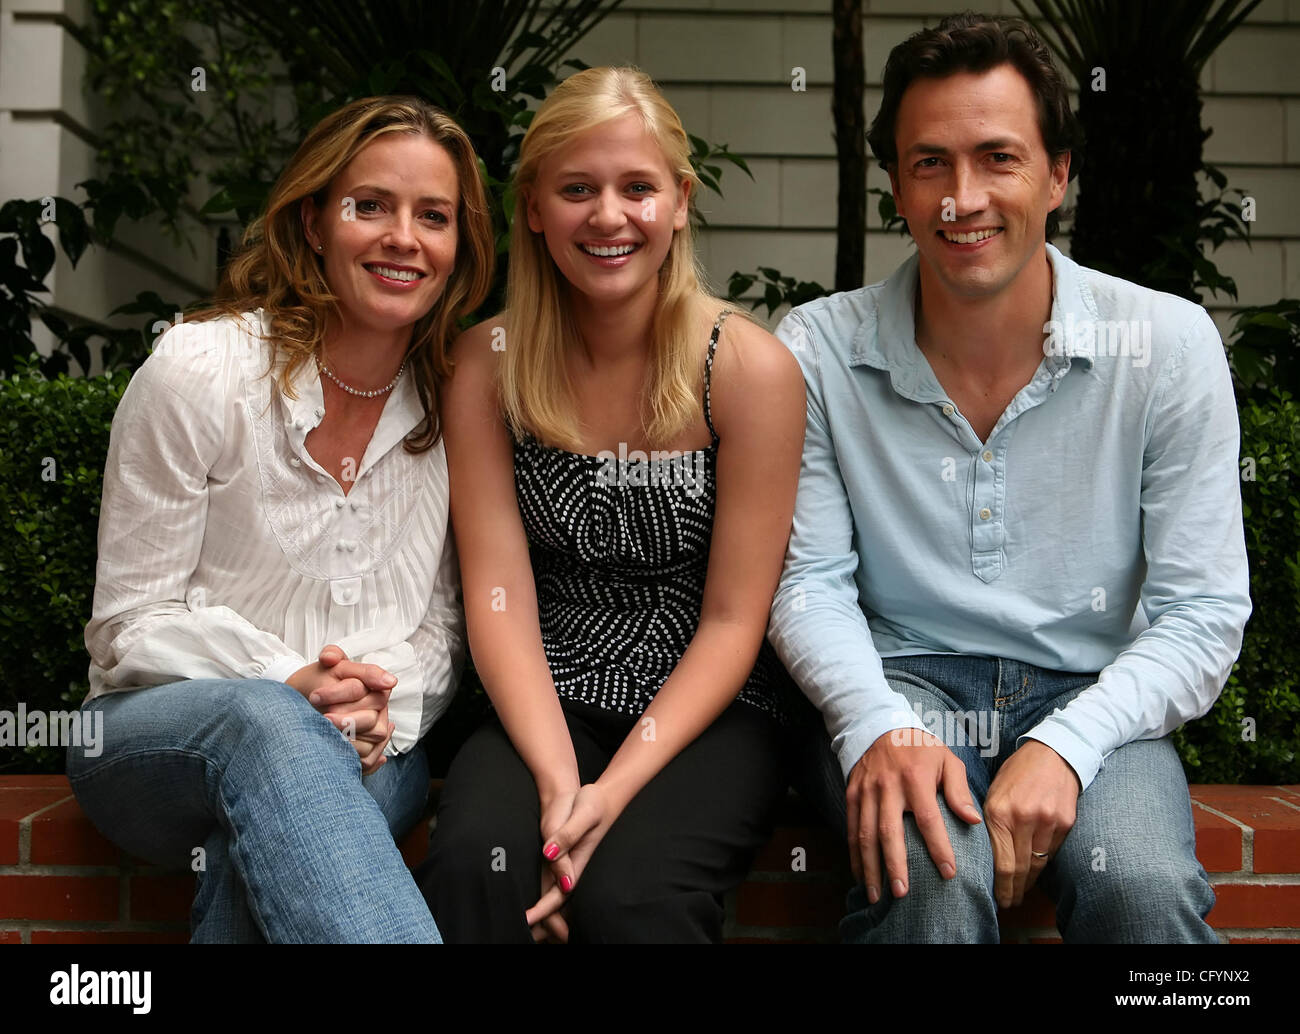 Elisabeth Shue And Family